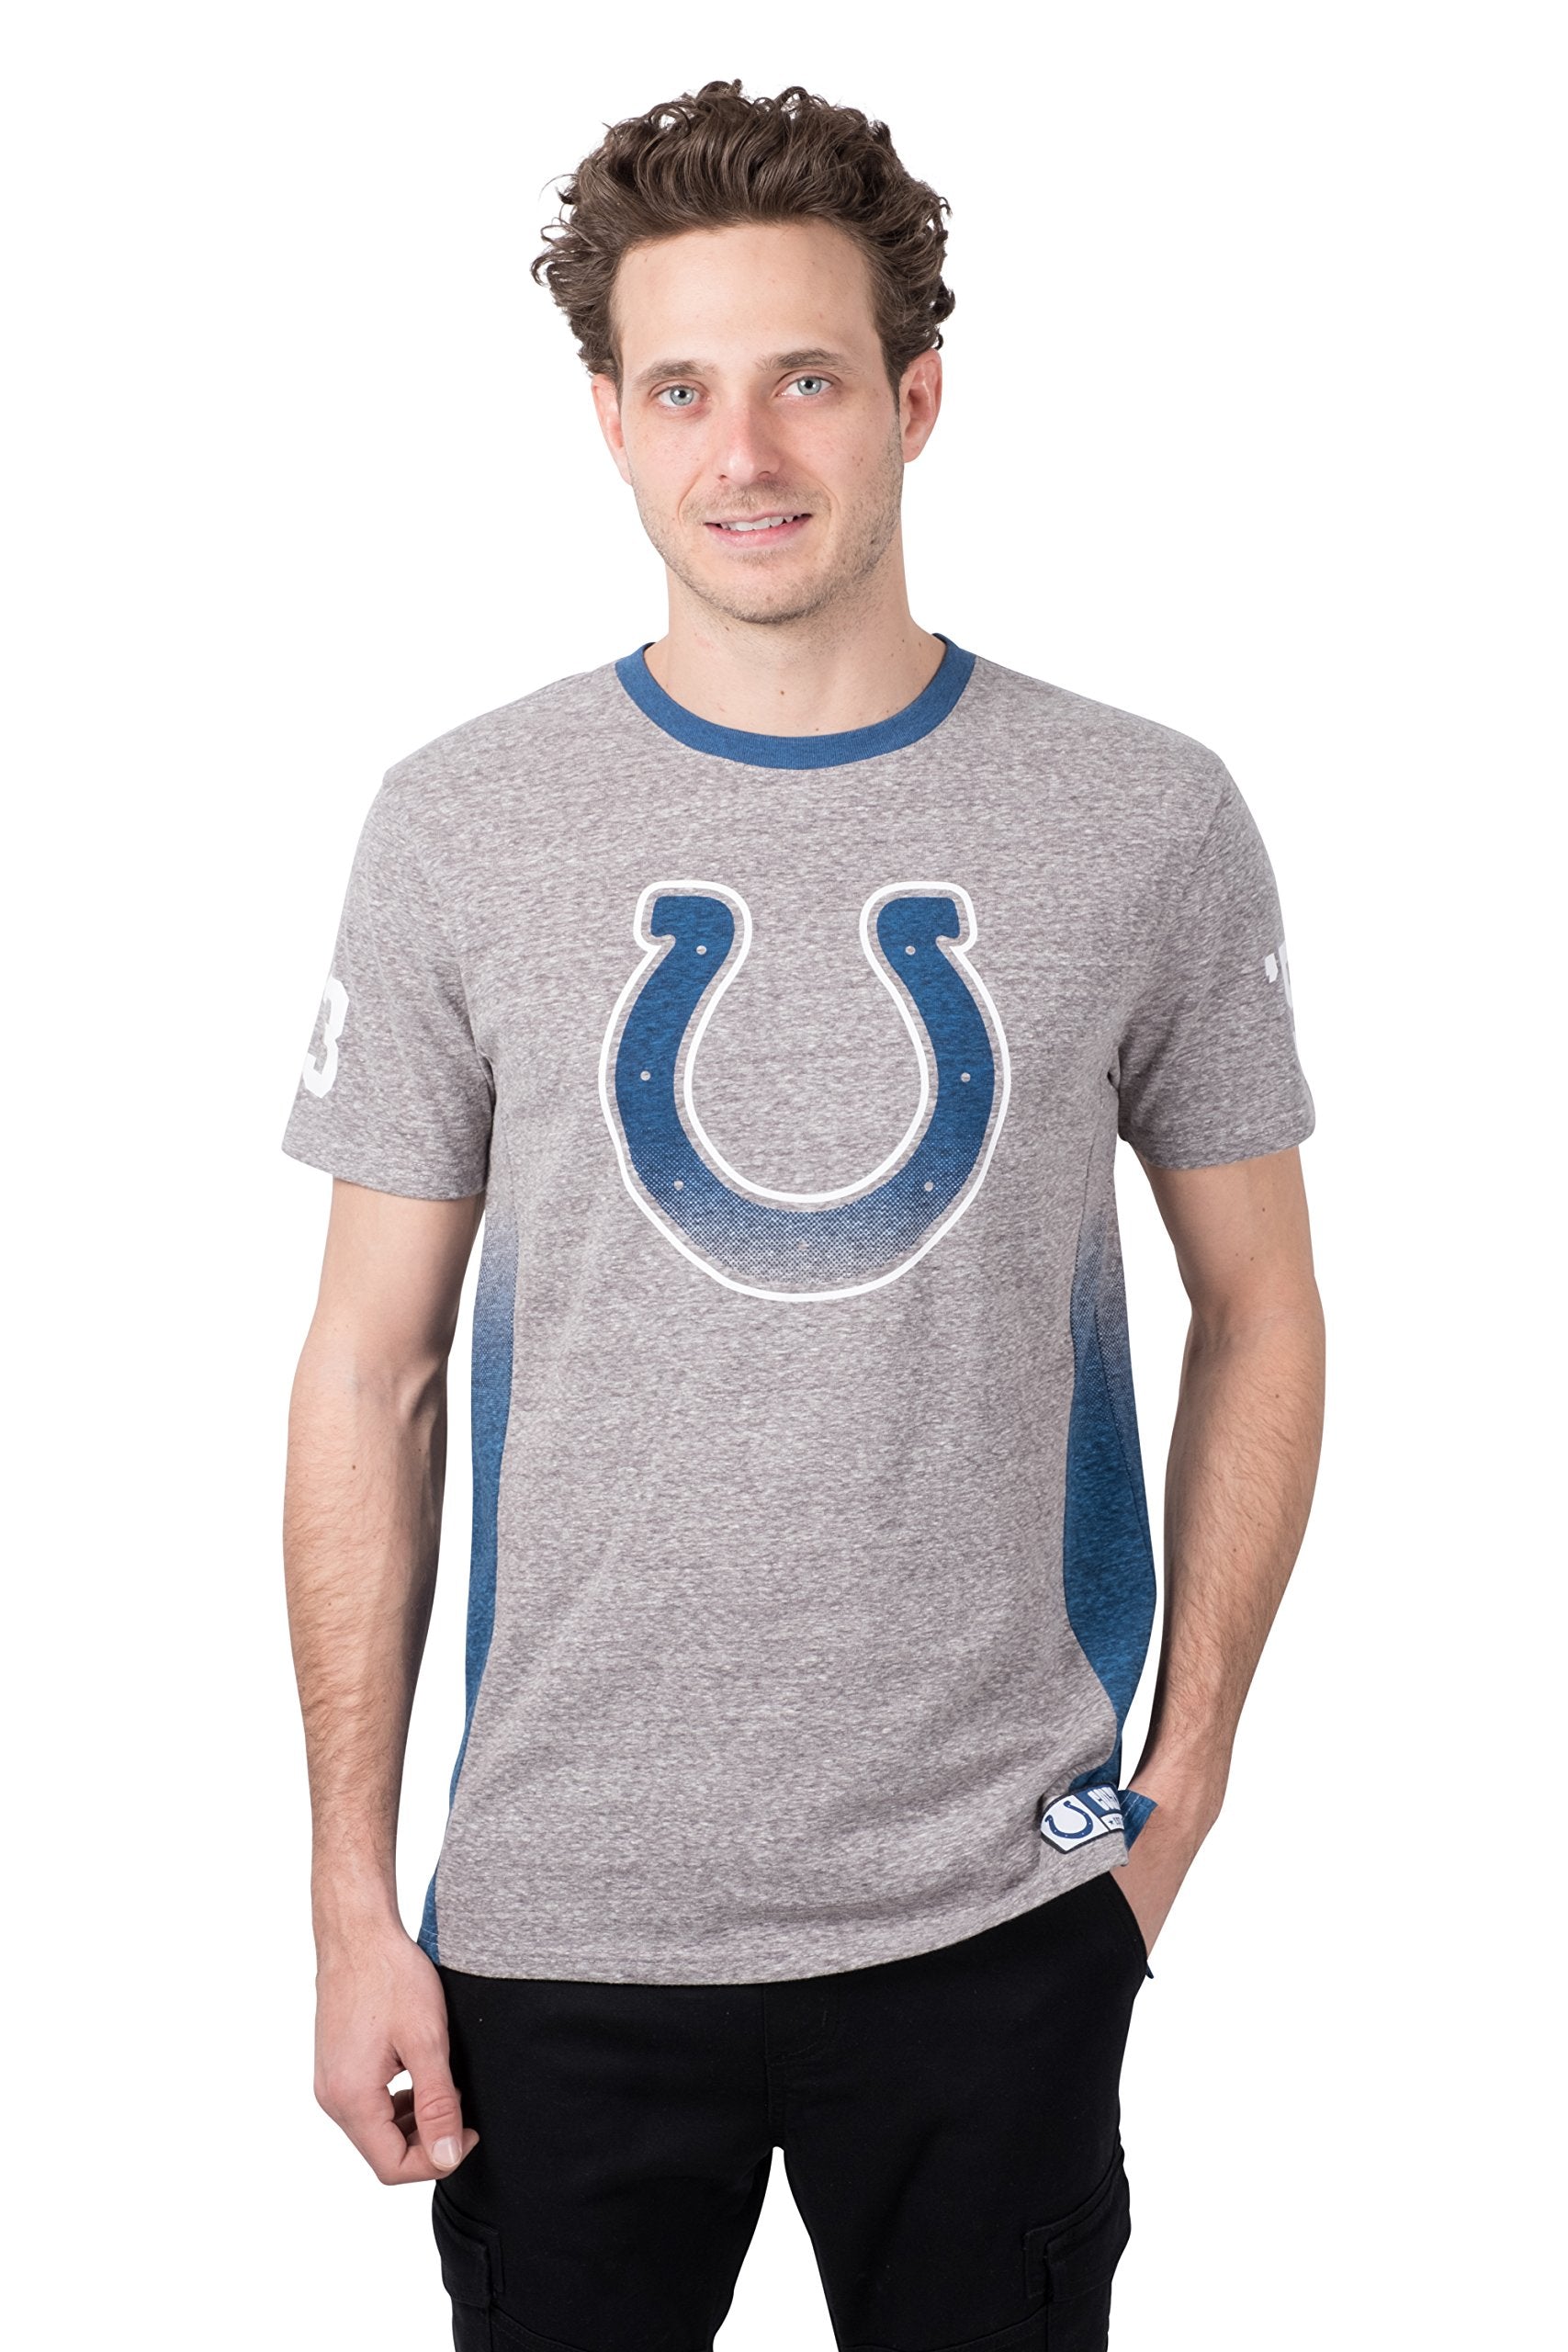 Ultra Game NFL Indianapolis Colts Mens Vintage Ringer Short Sleeve Tee Shirt|Indianapolis Colts